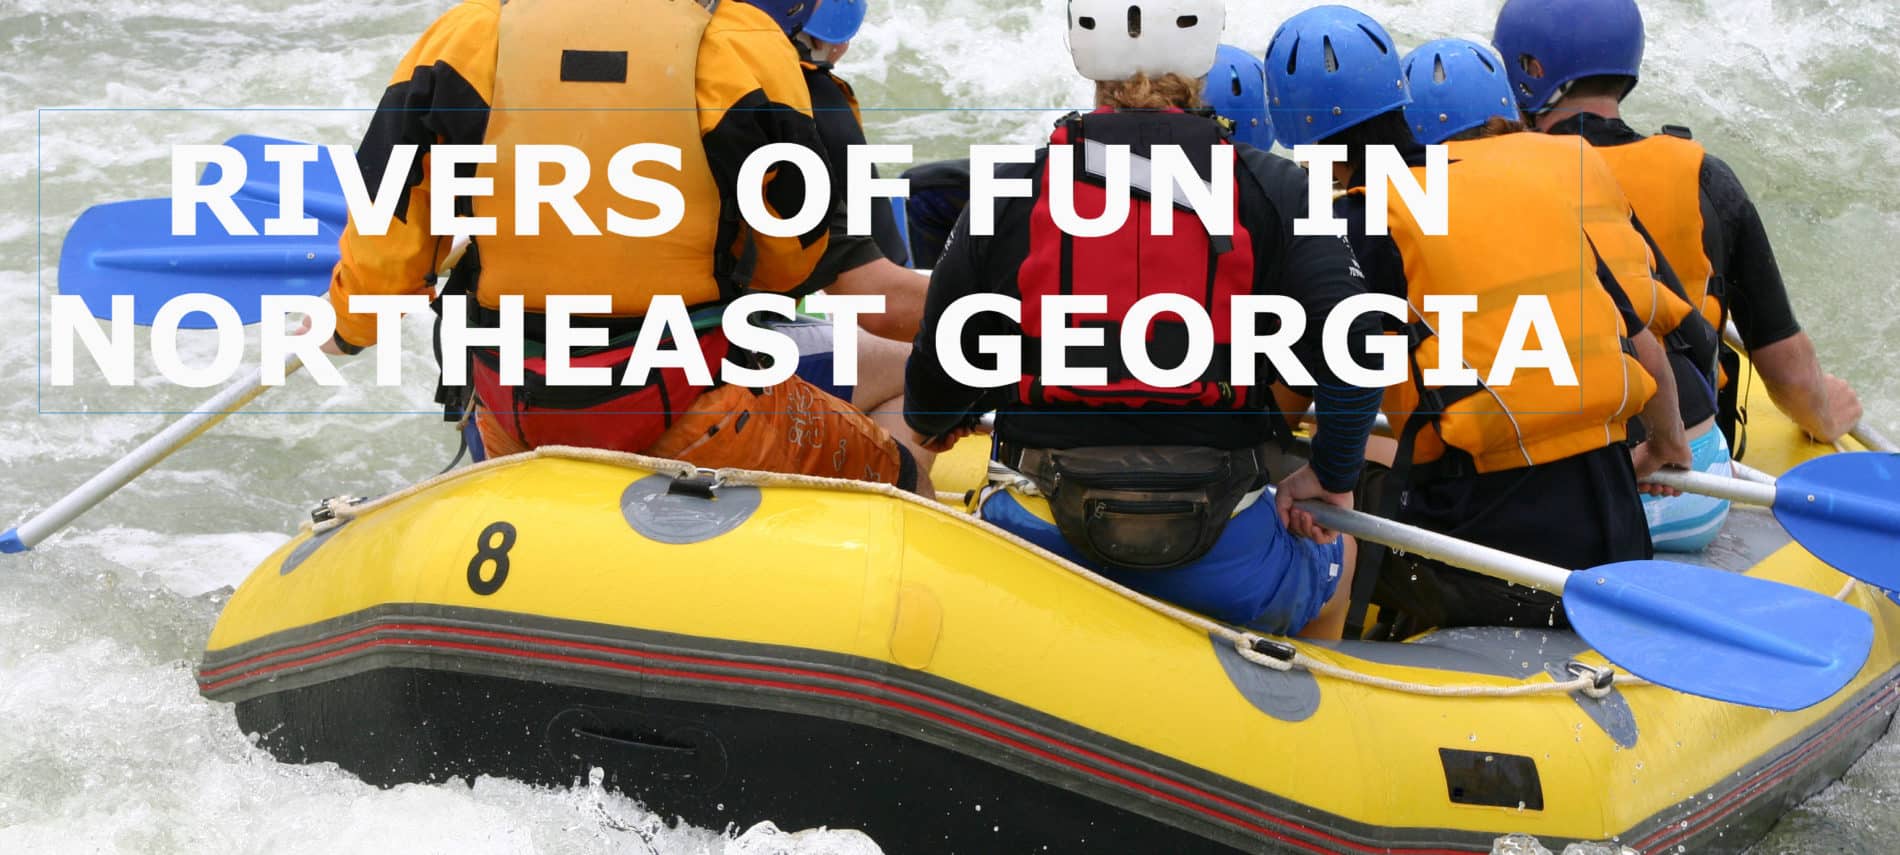 Title: Rivers of fun in north georgia mountains, with a raft going down the river with 8 guys in a yellow and black raft